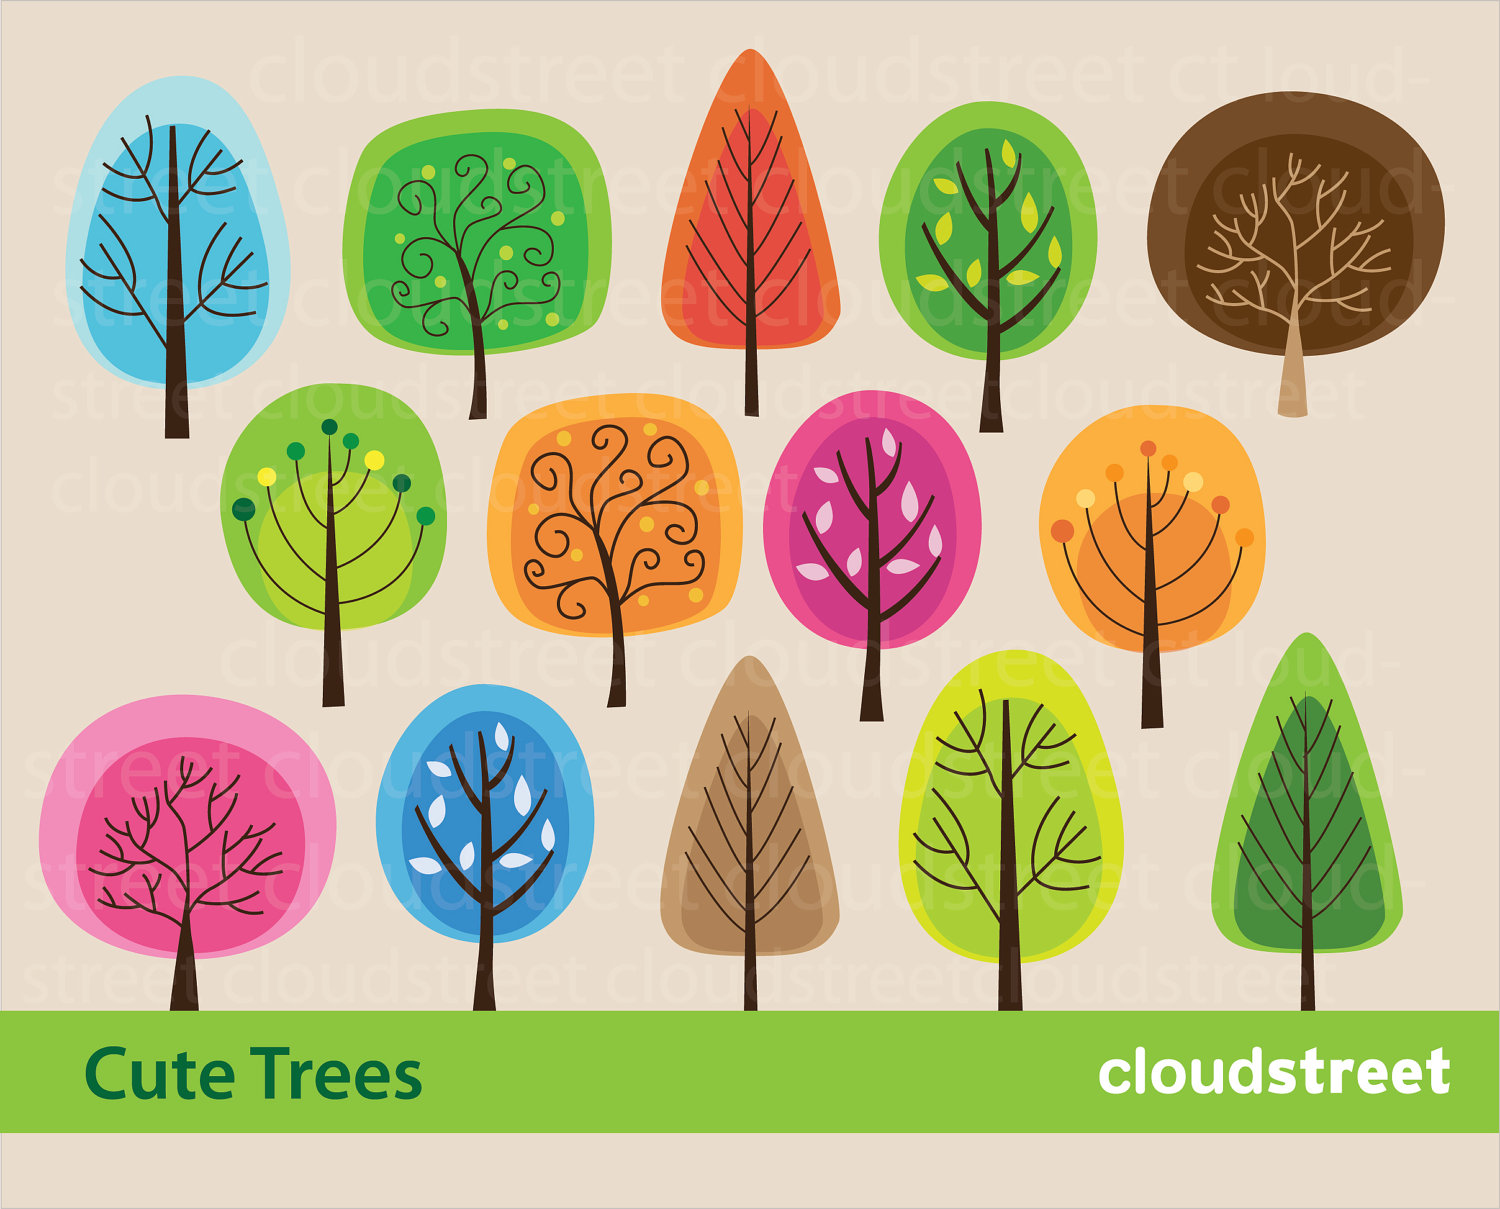 Buy 2 Get 1 Free Cute Trees Clip Art For By Cloudstreetlab On Etsy